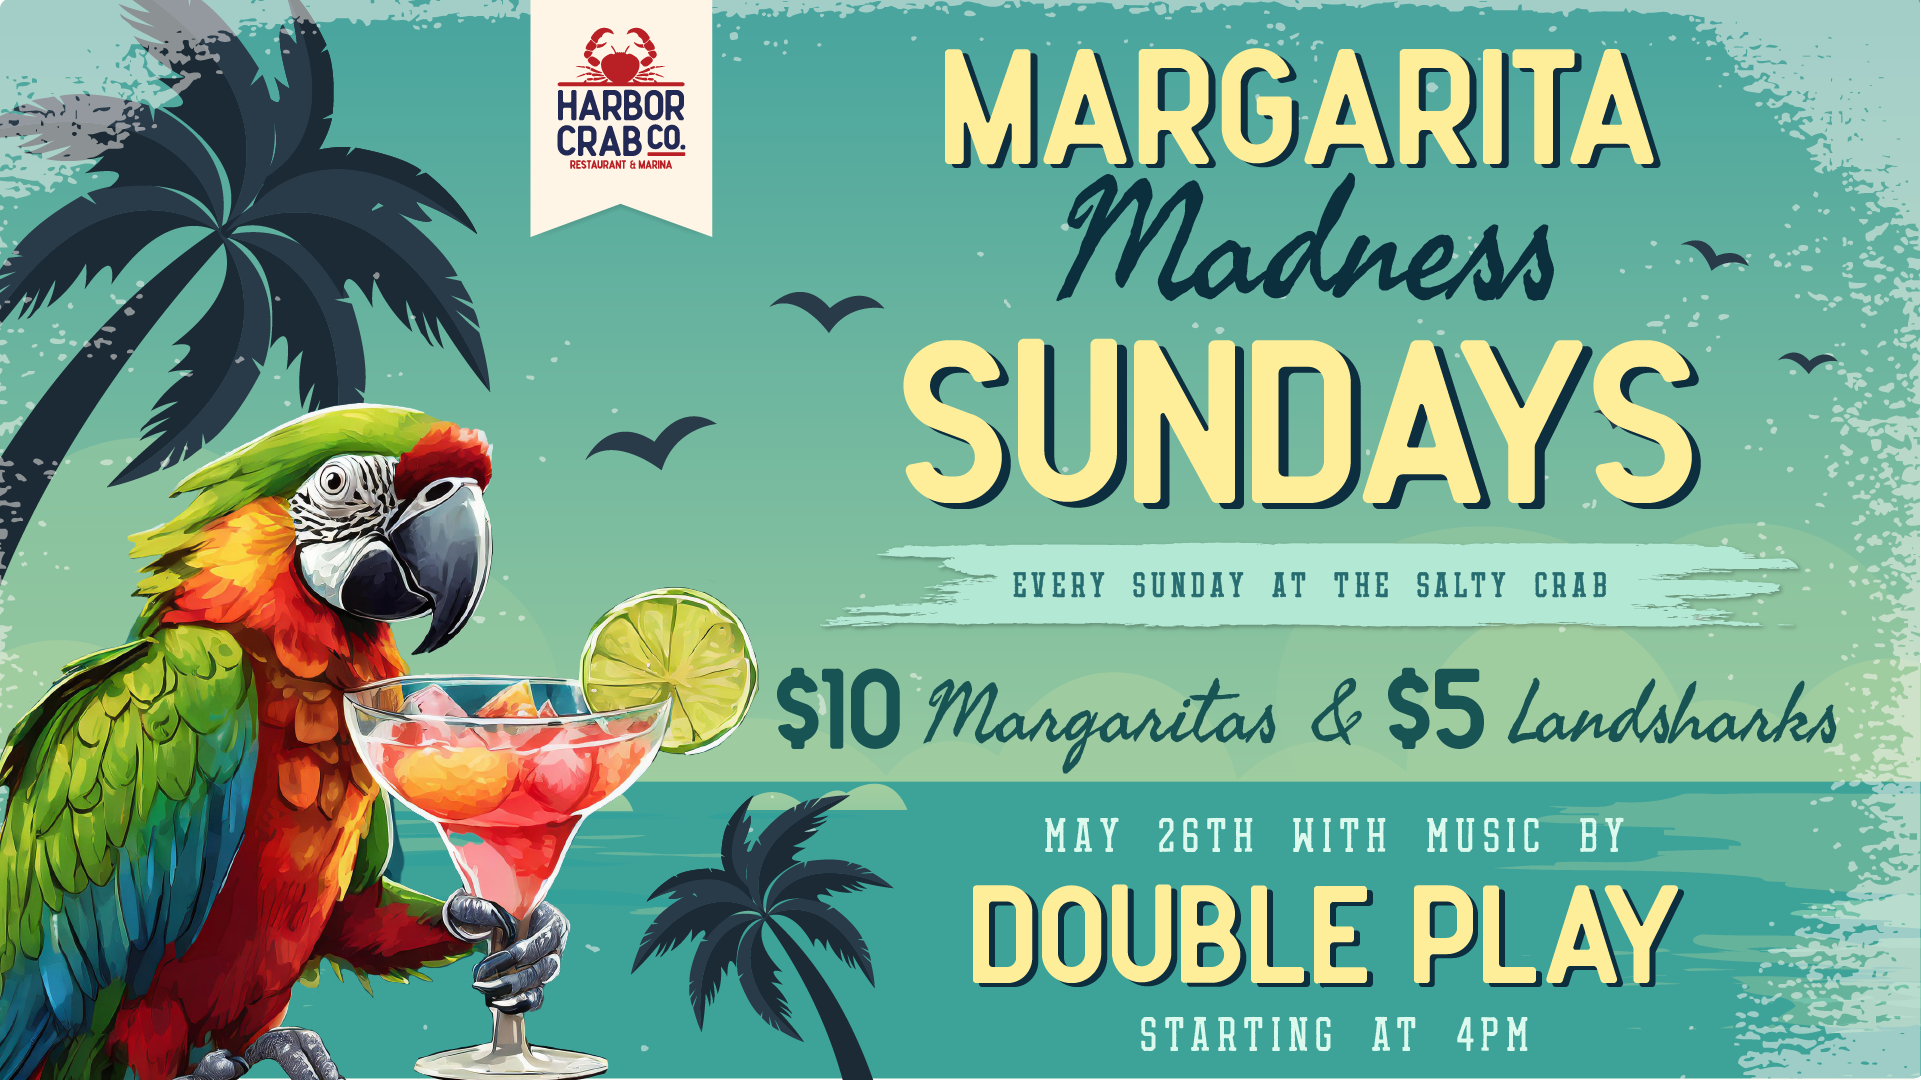 Margarita Madness Sundays at Harbor Crab on May 26th, live music by Double Play starting at 4 PM with drink specials.